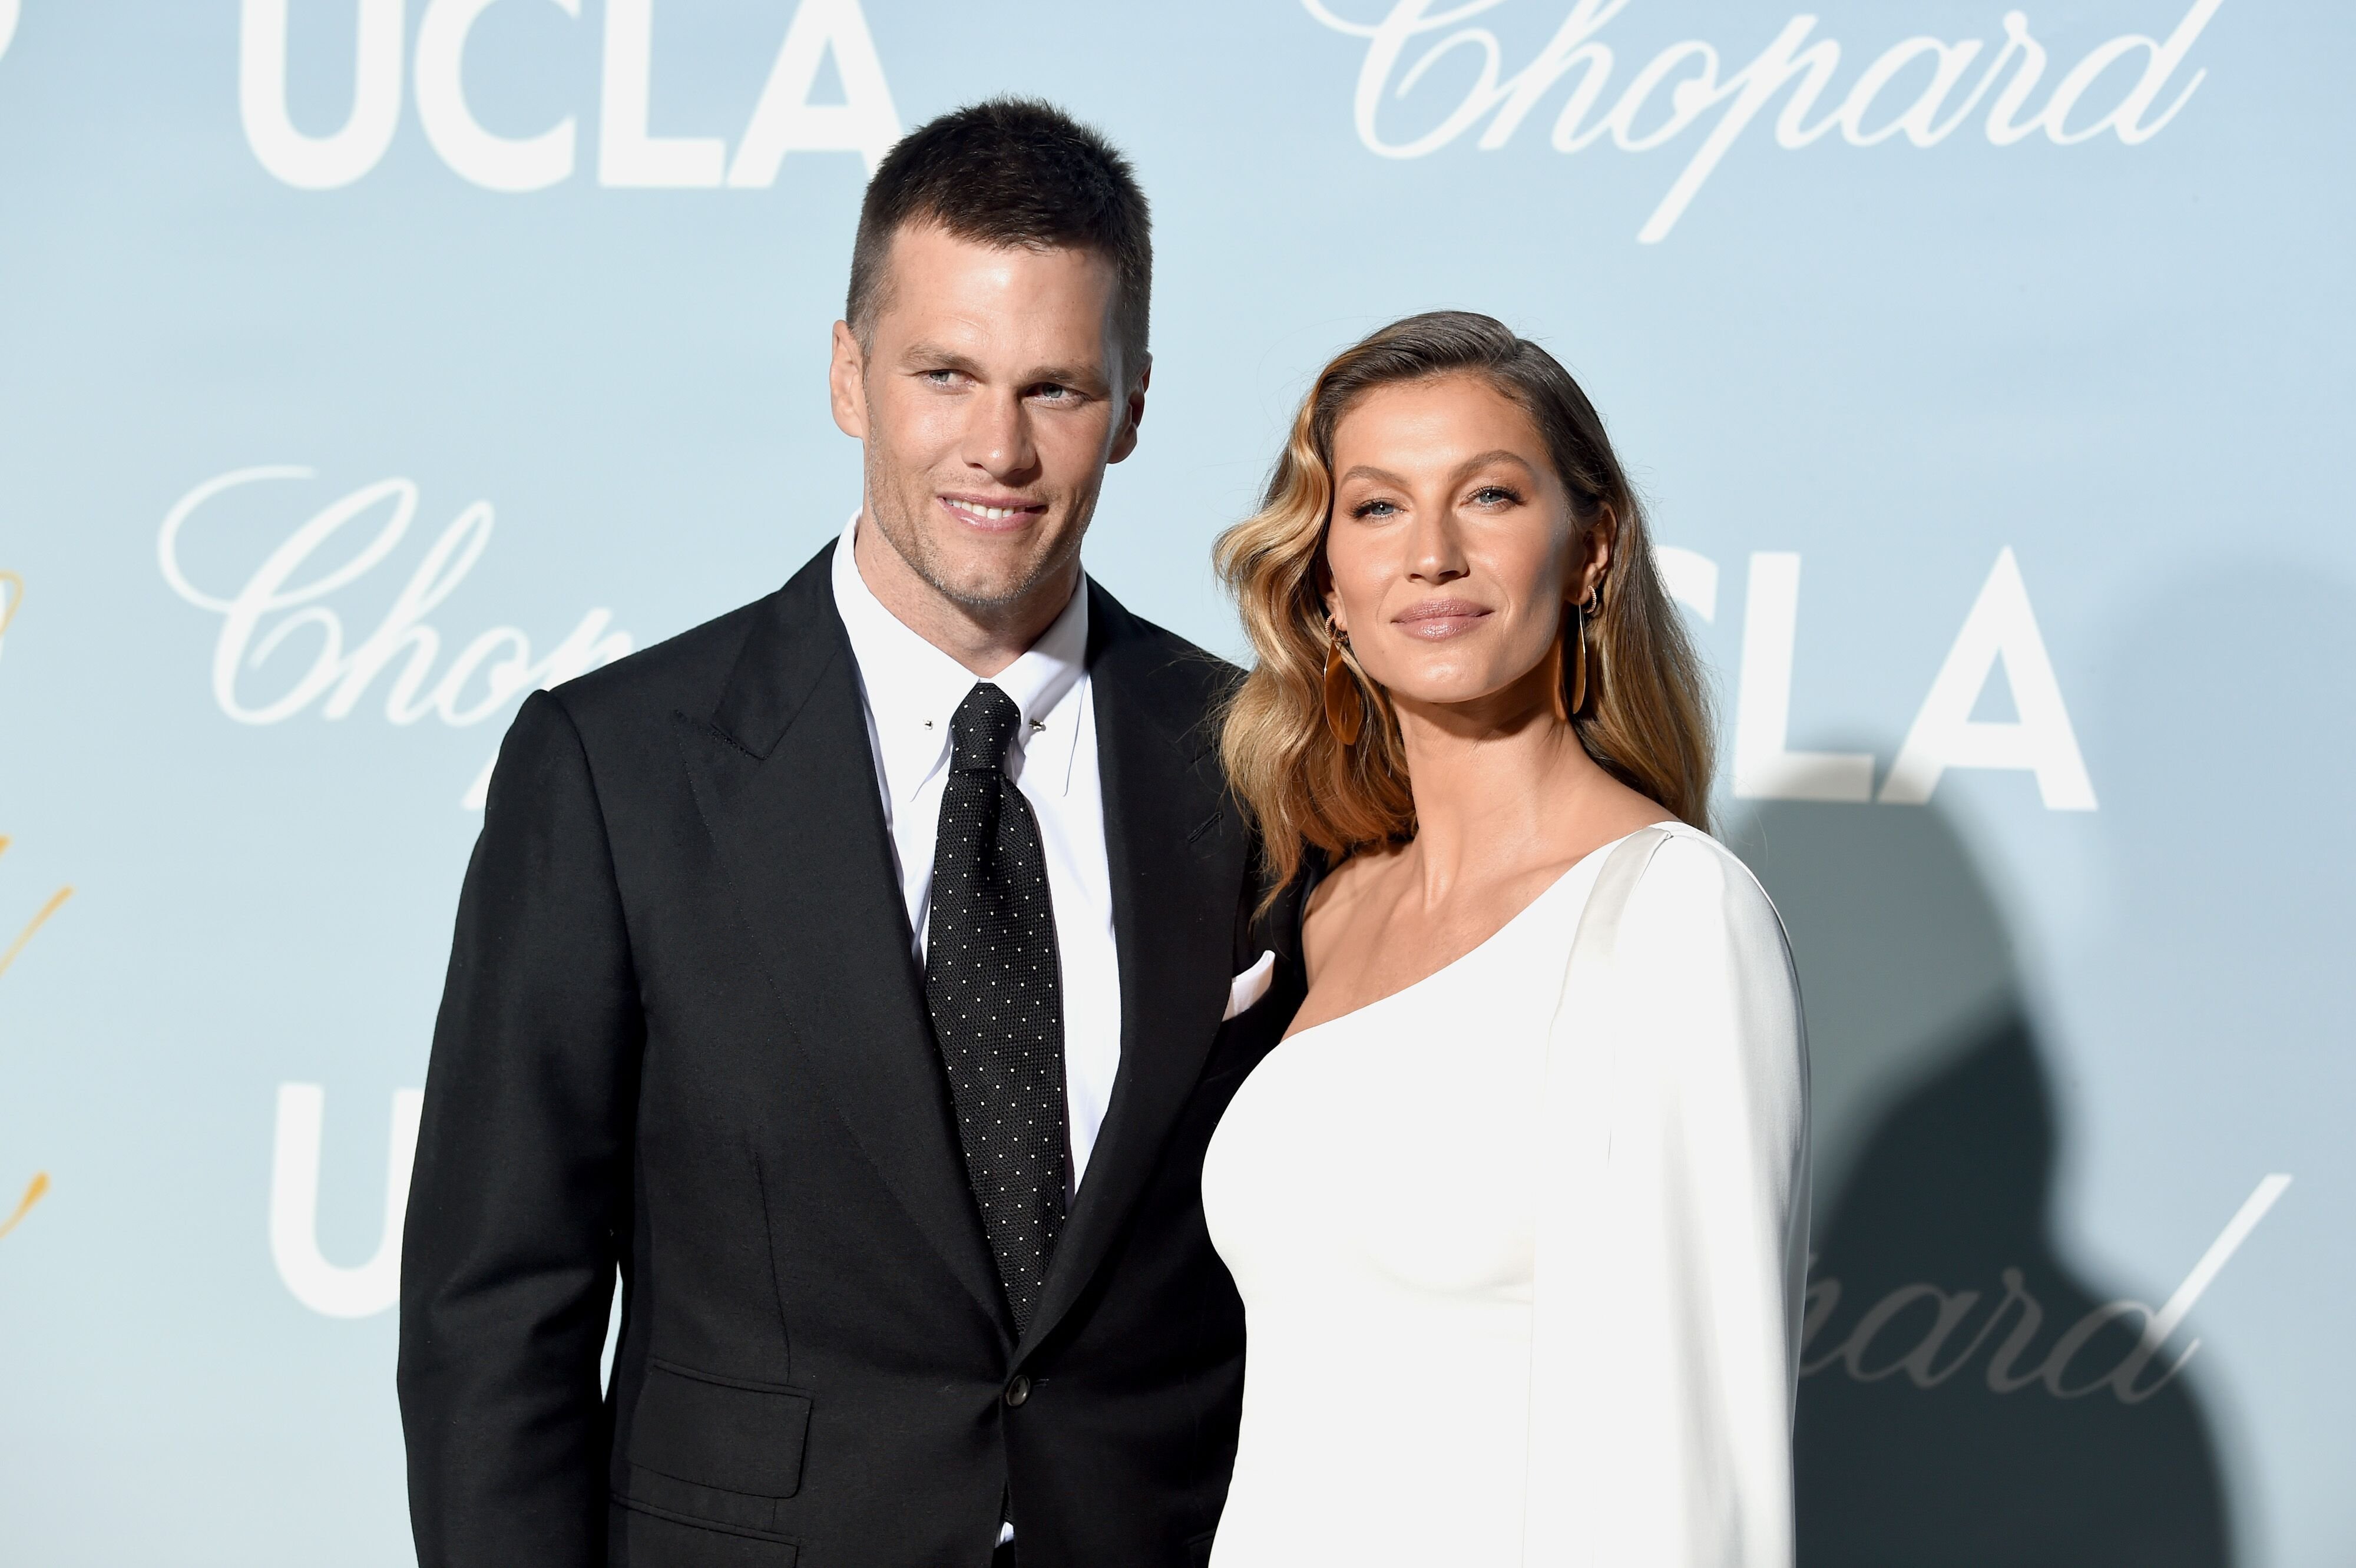 Tom Brady and Gisele Bündchen attends the 2019 Hollywood For Science Gala at Private Residence on February 21, 2019 in Los Angeles, California | Photo: Getty Images